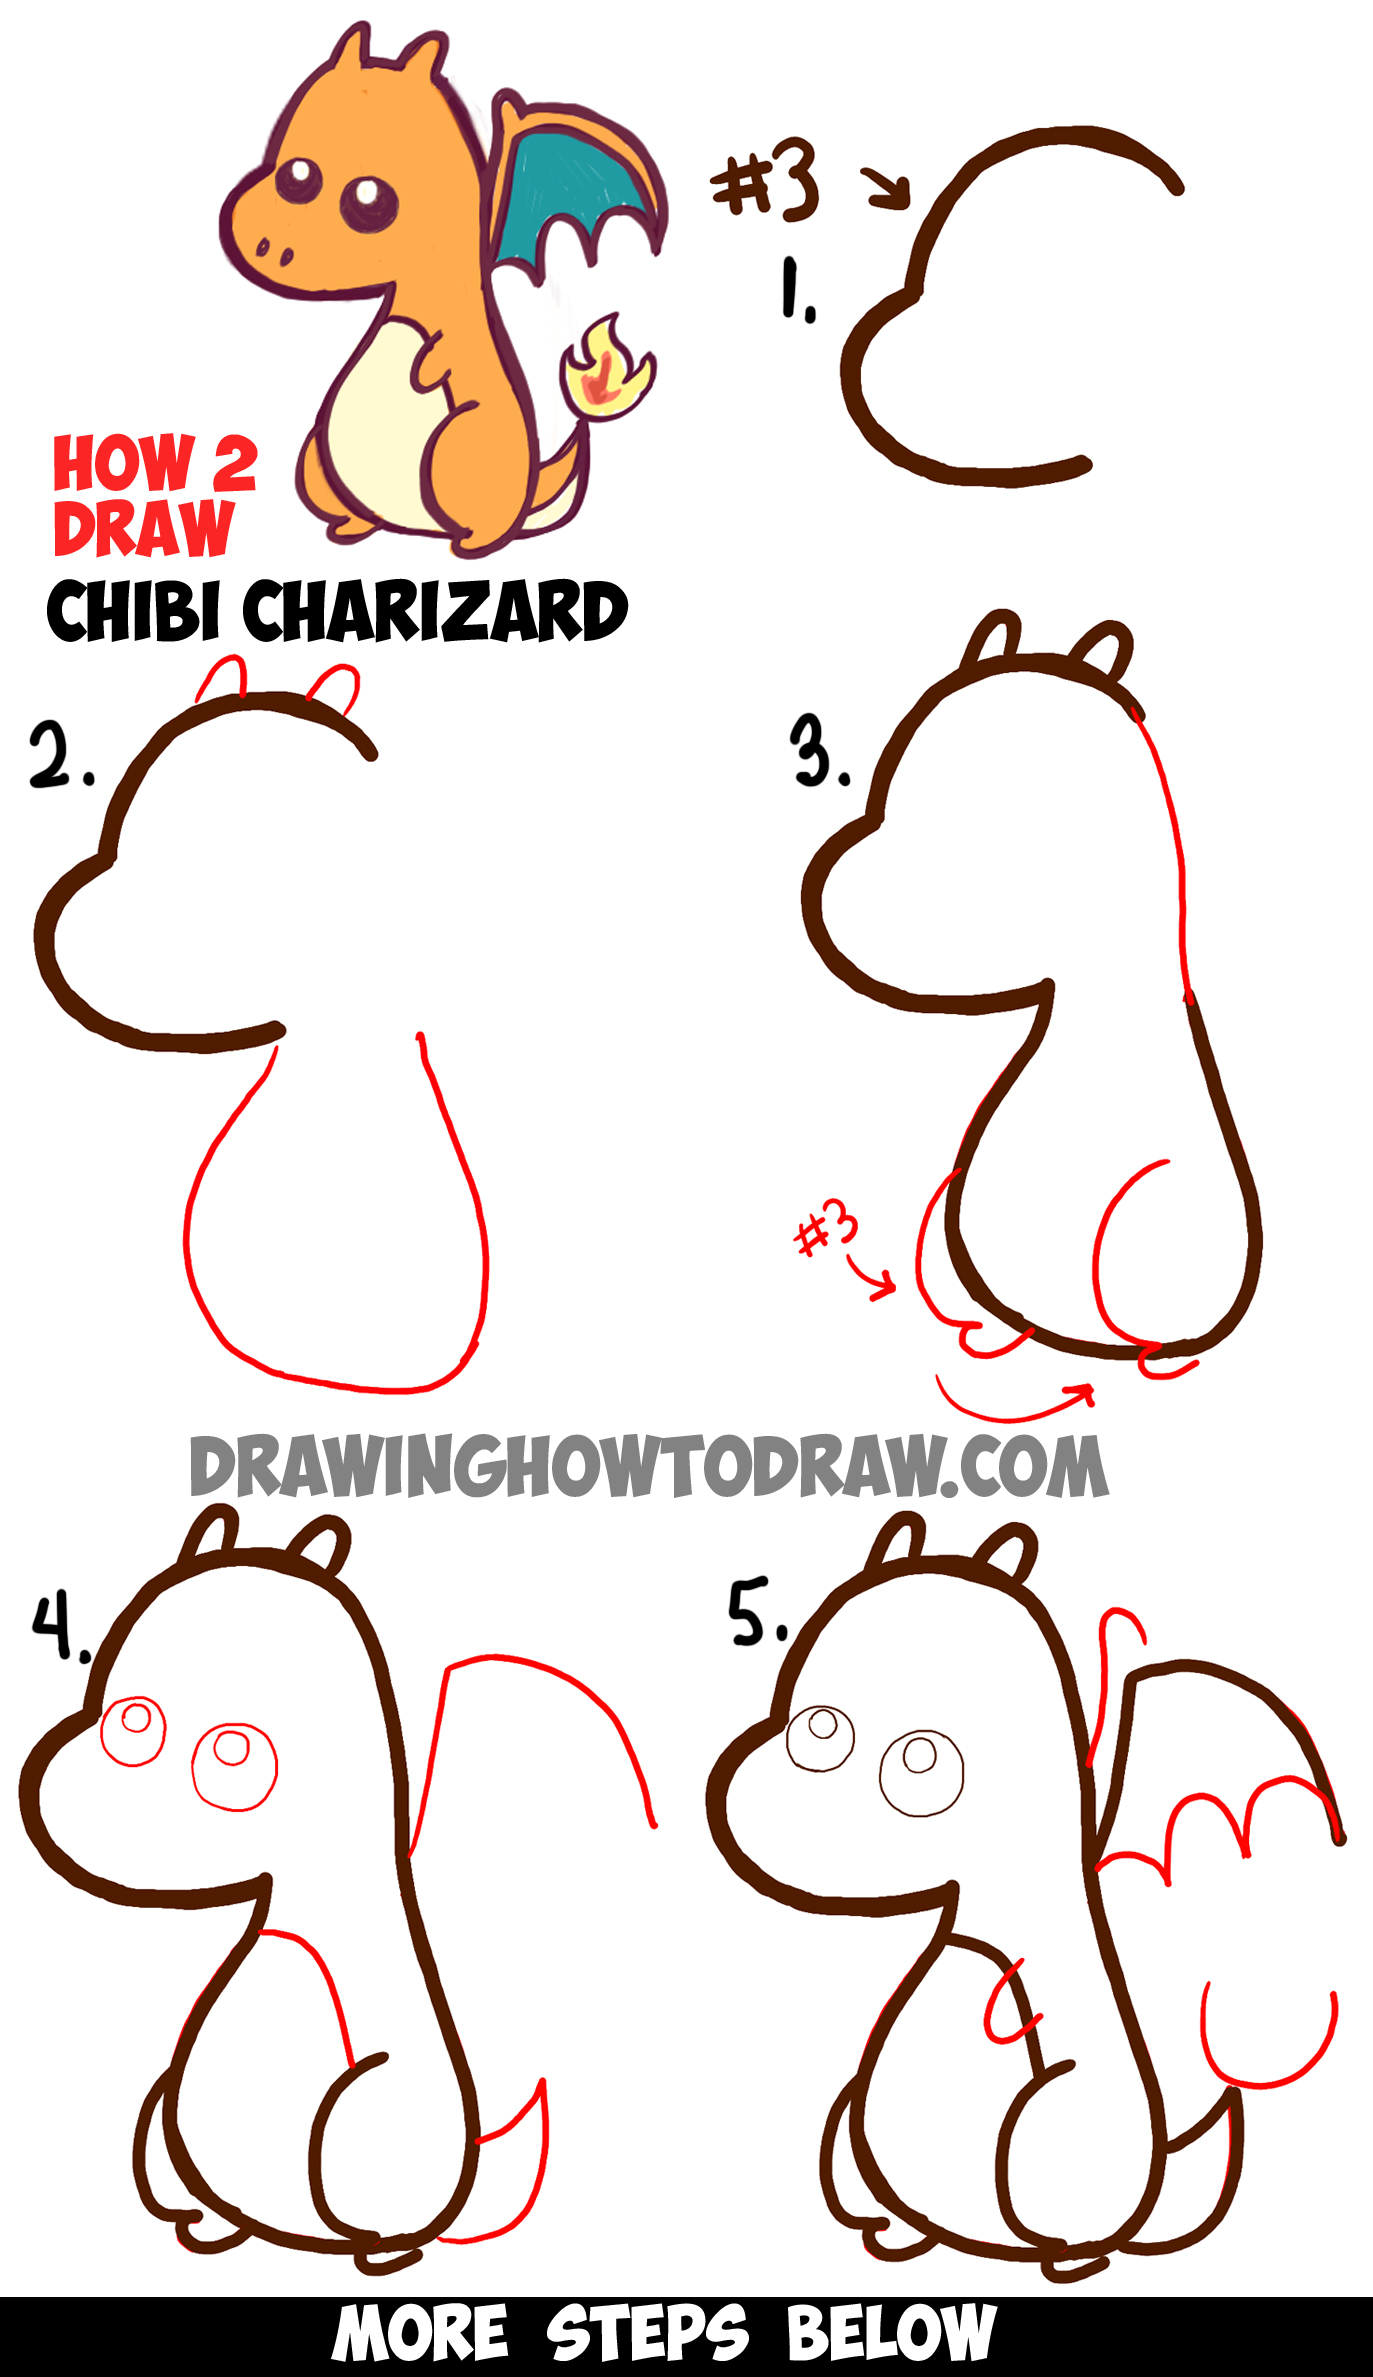 Learn How to Draw a Cute Baby Chibi Charizard from Pokemon in Simple Step by Step Drawing Lesson